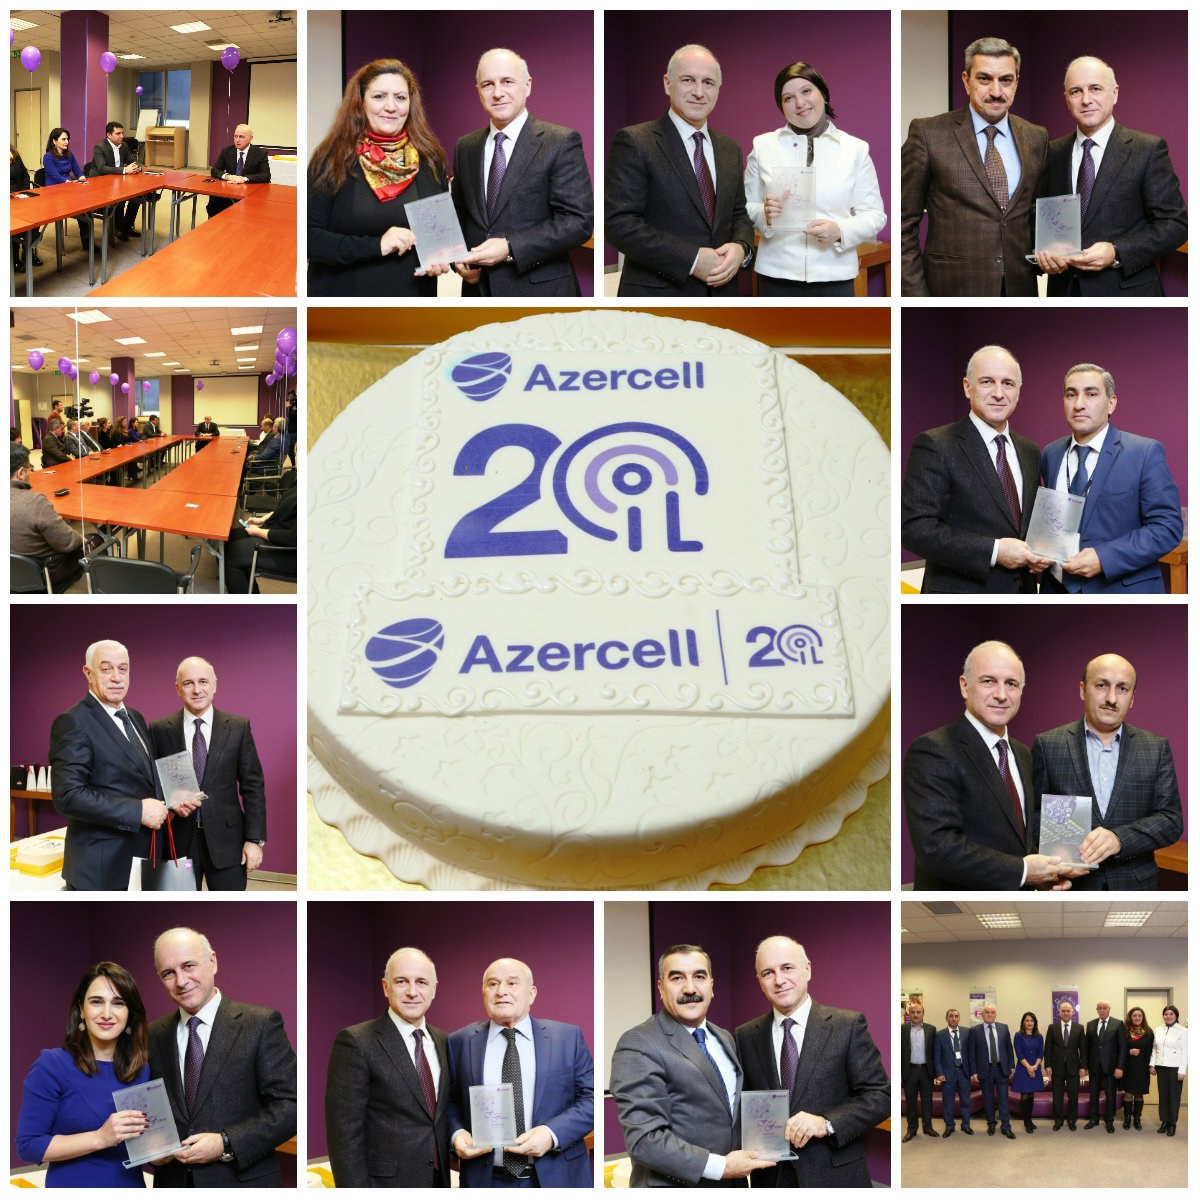 Azercell rewards its 20 years working employees